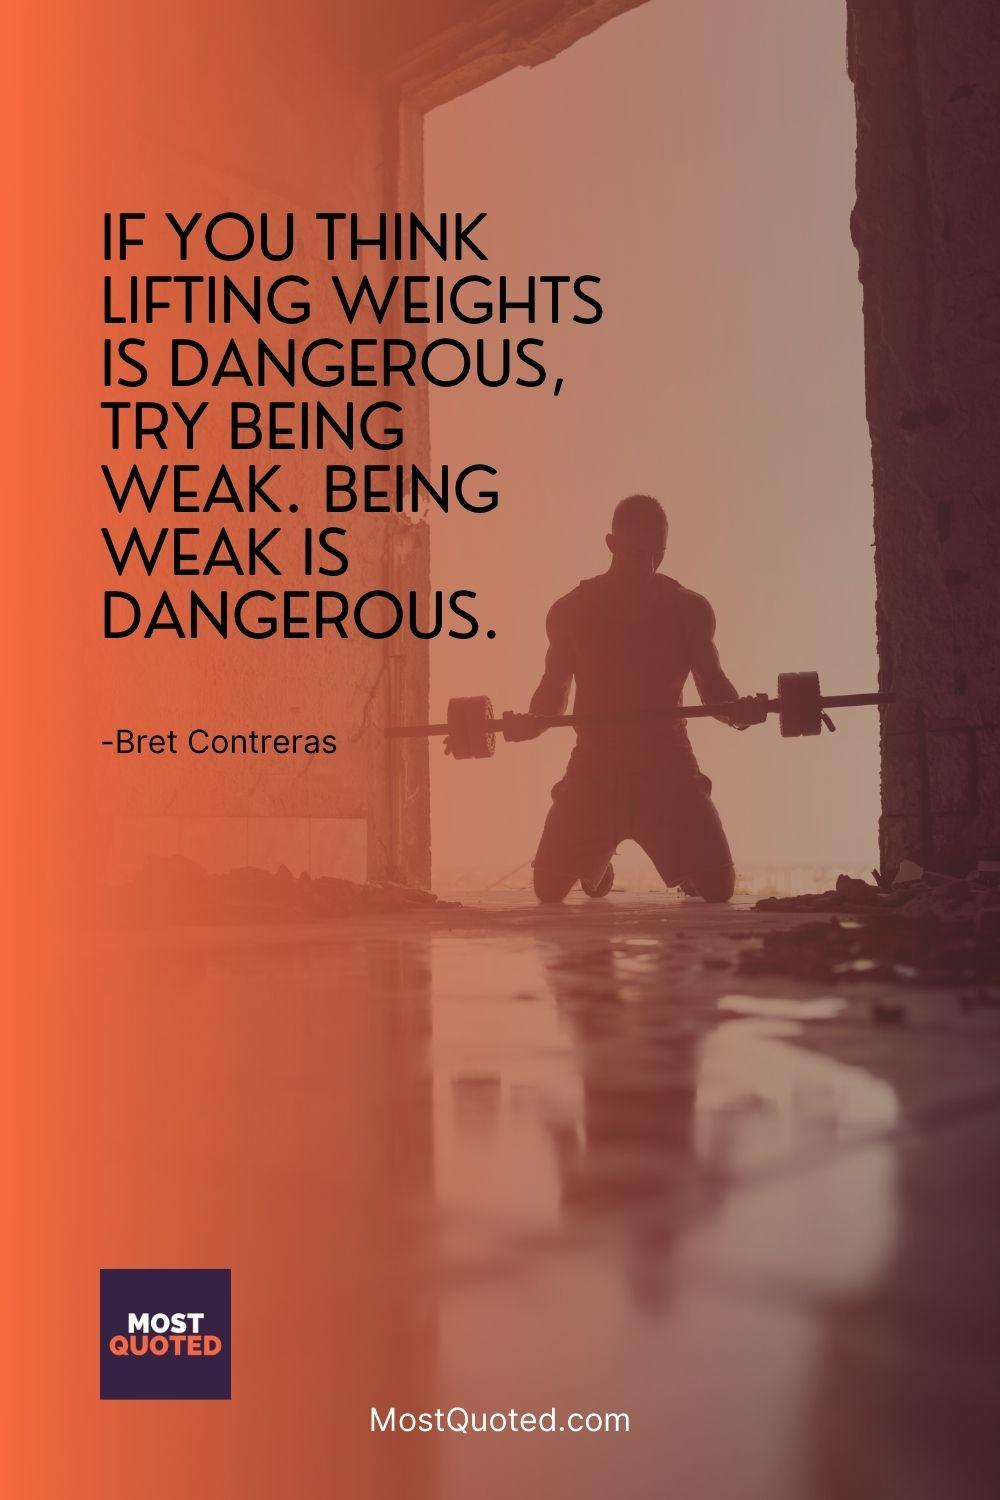 If you think lifting weights is dangerous, try being weak. Being weak is dangerous.